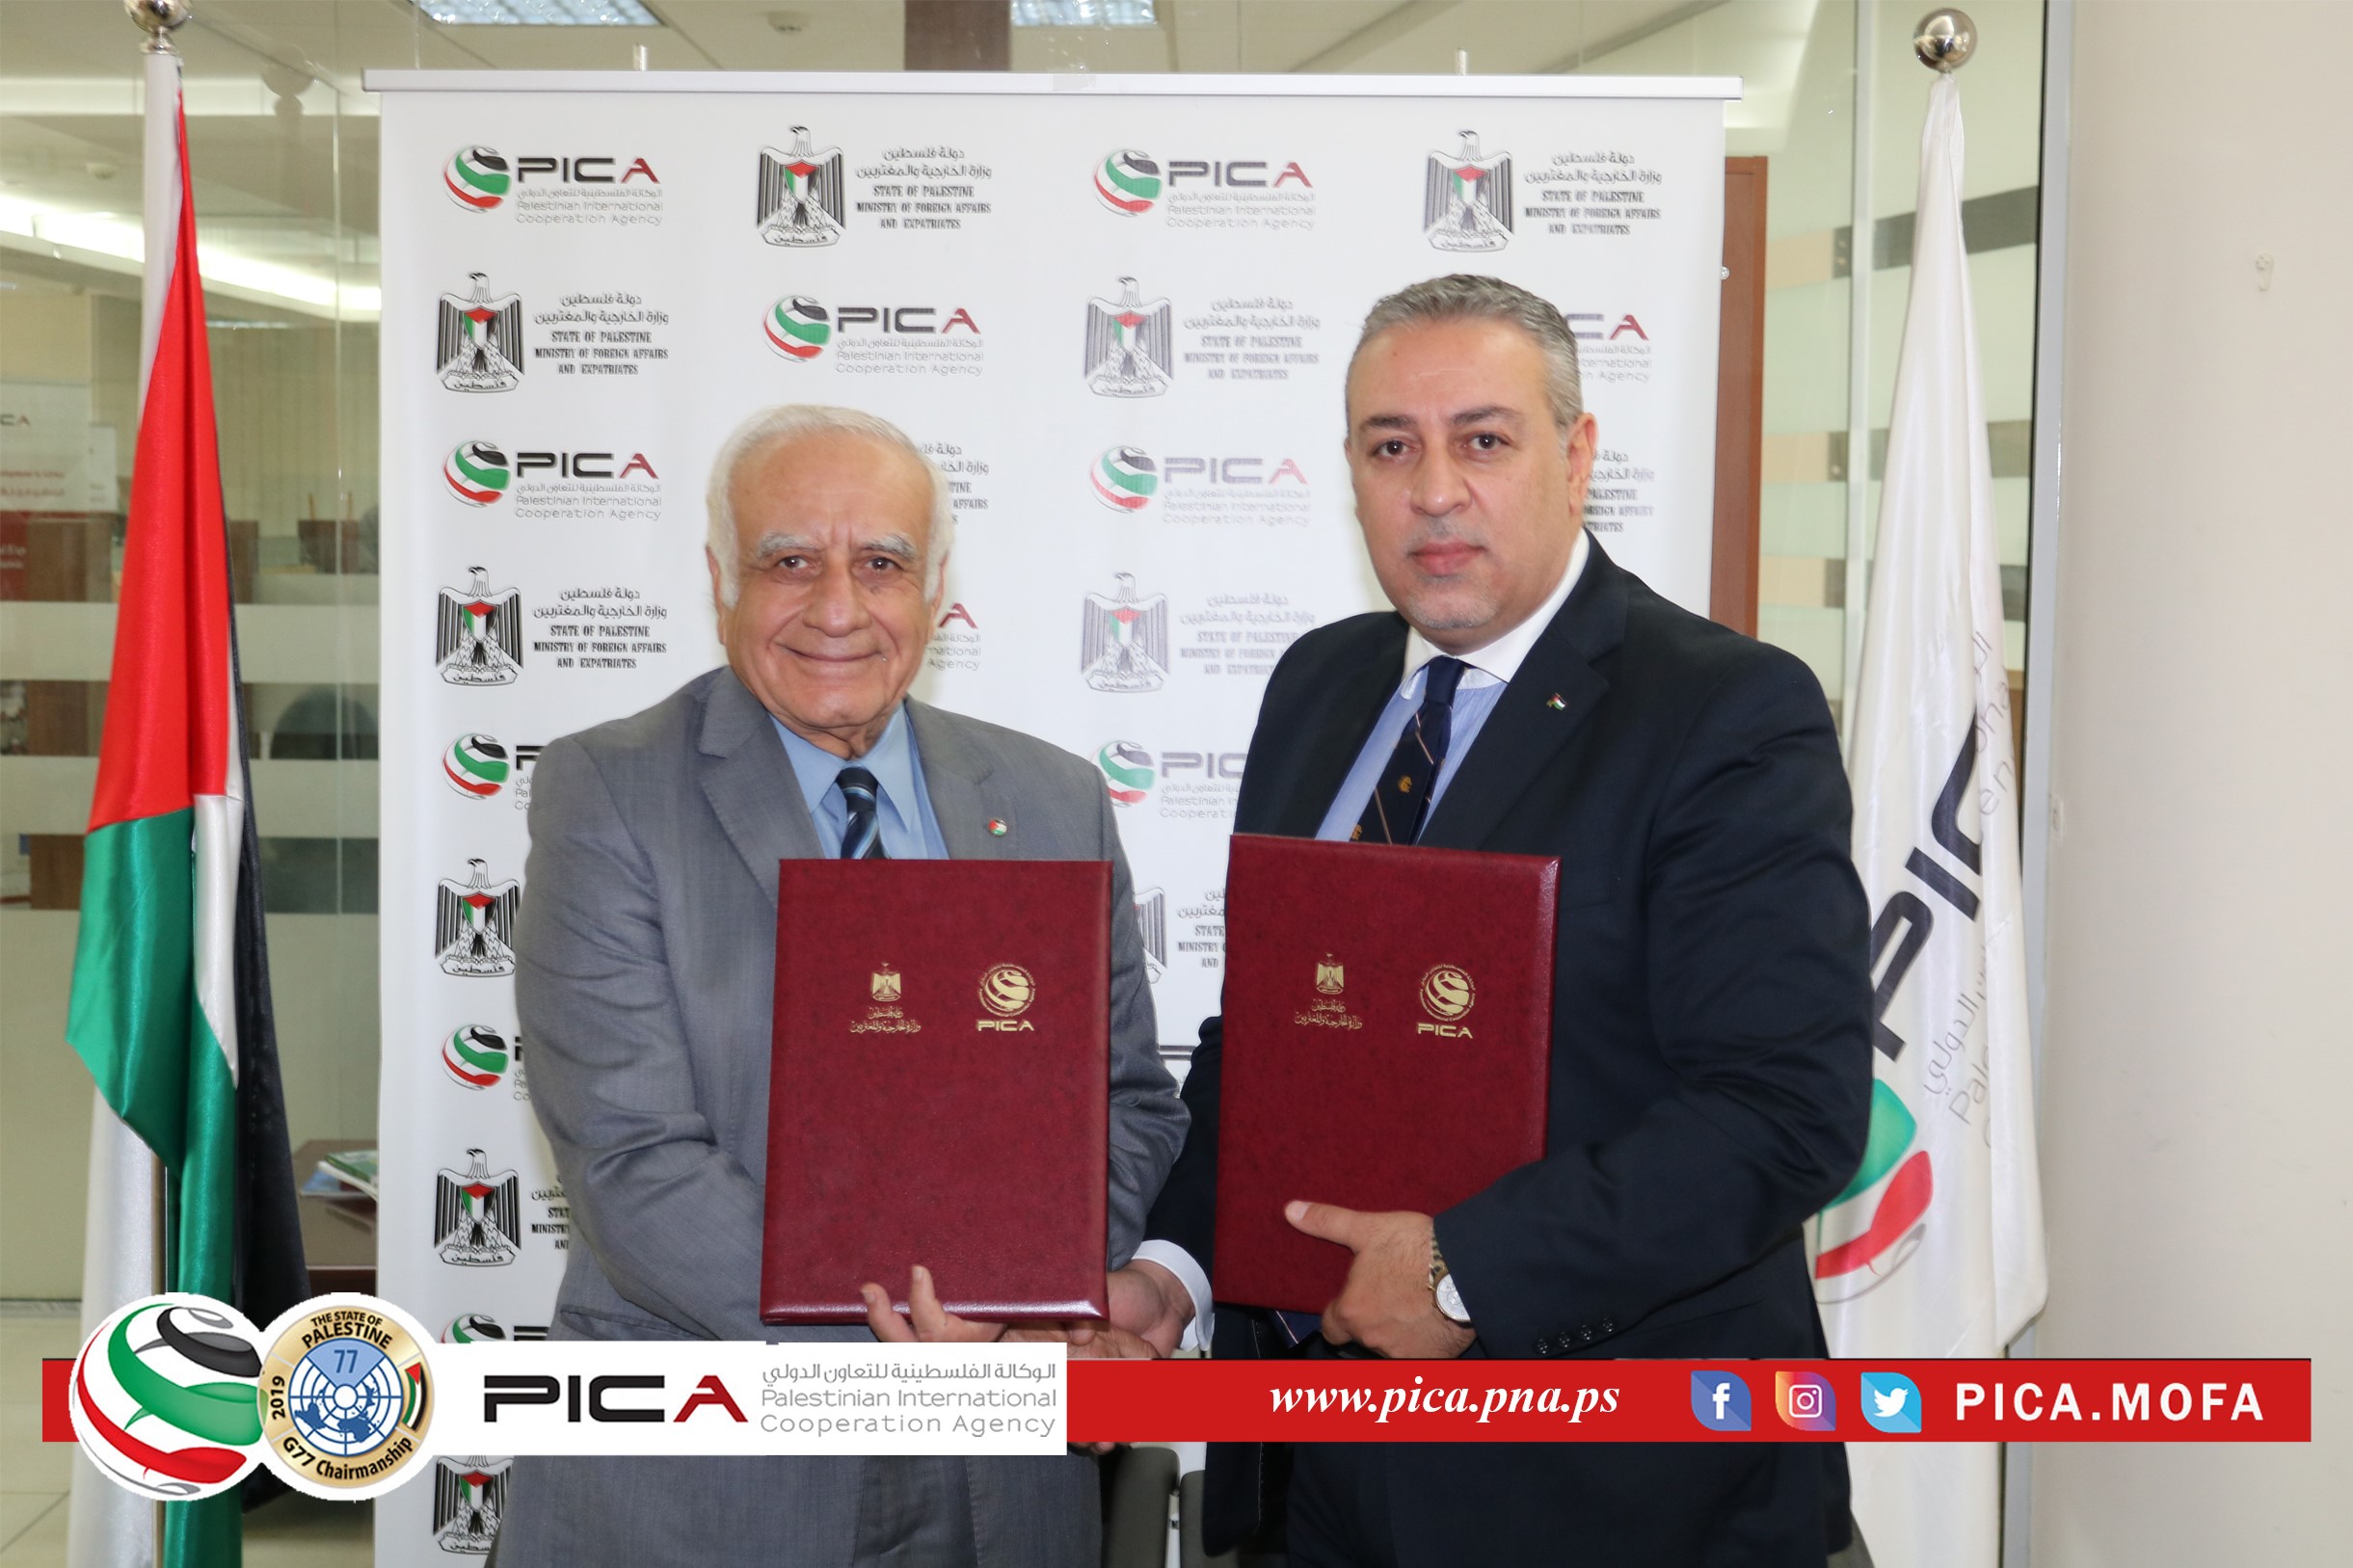 MoU Between PICA and HCIE to Enhance Cooperation with the Palestinian Entrepreneurial Ecosystem